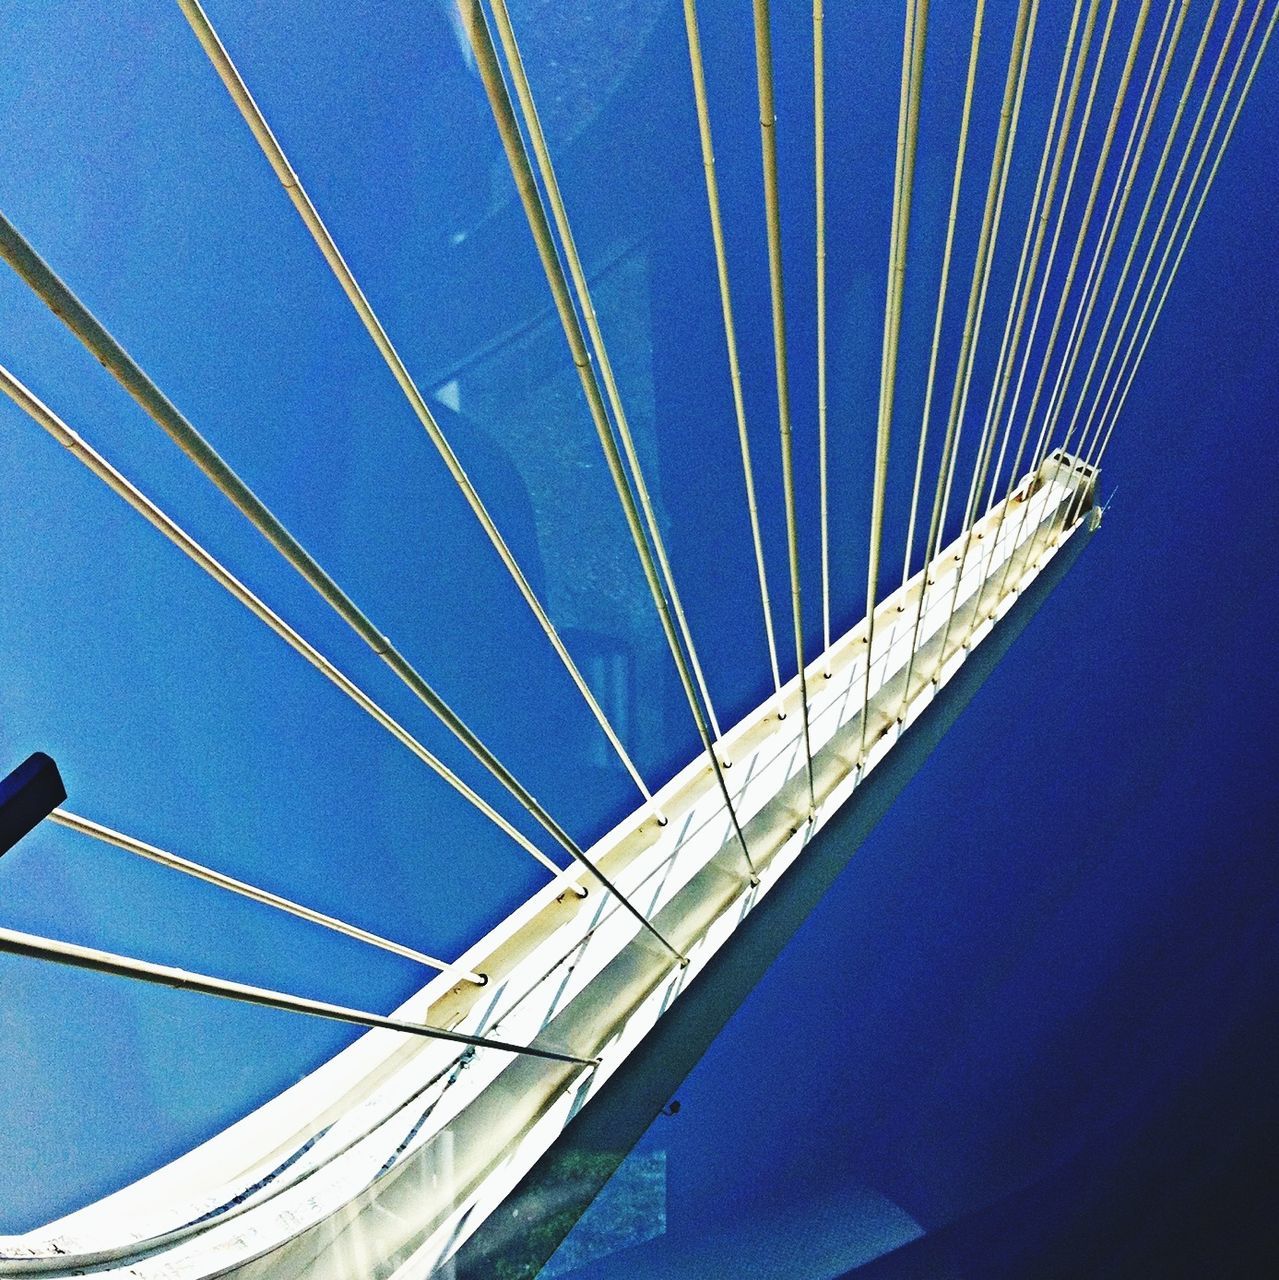 blue, connection, built structure, bridge - man made structure, architecture, low angle view, engineering, transportation, suspension bridge, bridge, sky, cable-stayed bridge, water, railing, day, outdoors, no people, clear sky, steel cable, travel